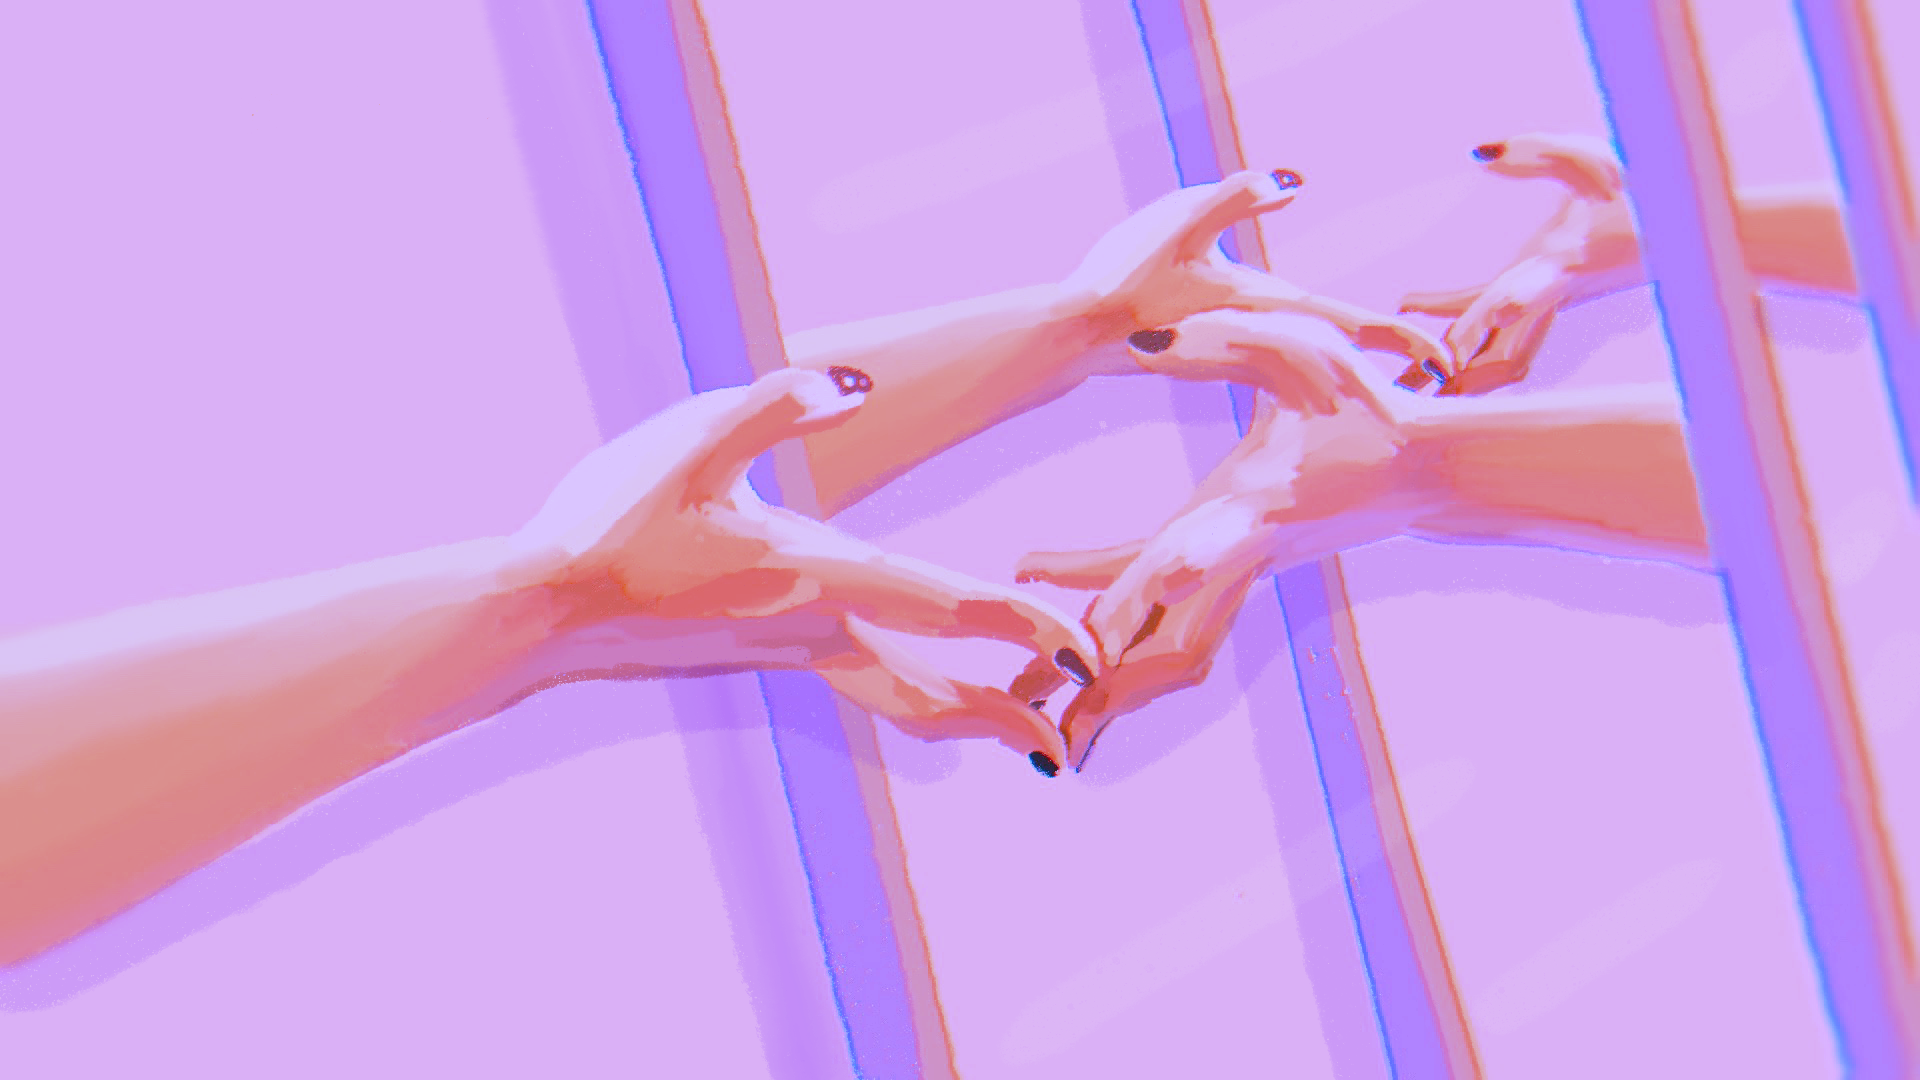 Image of hands being reflected across multiple mirrors